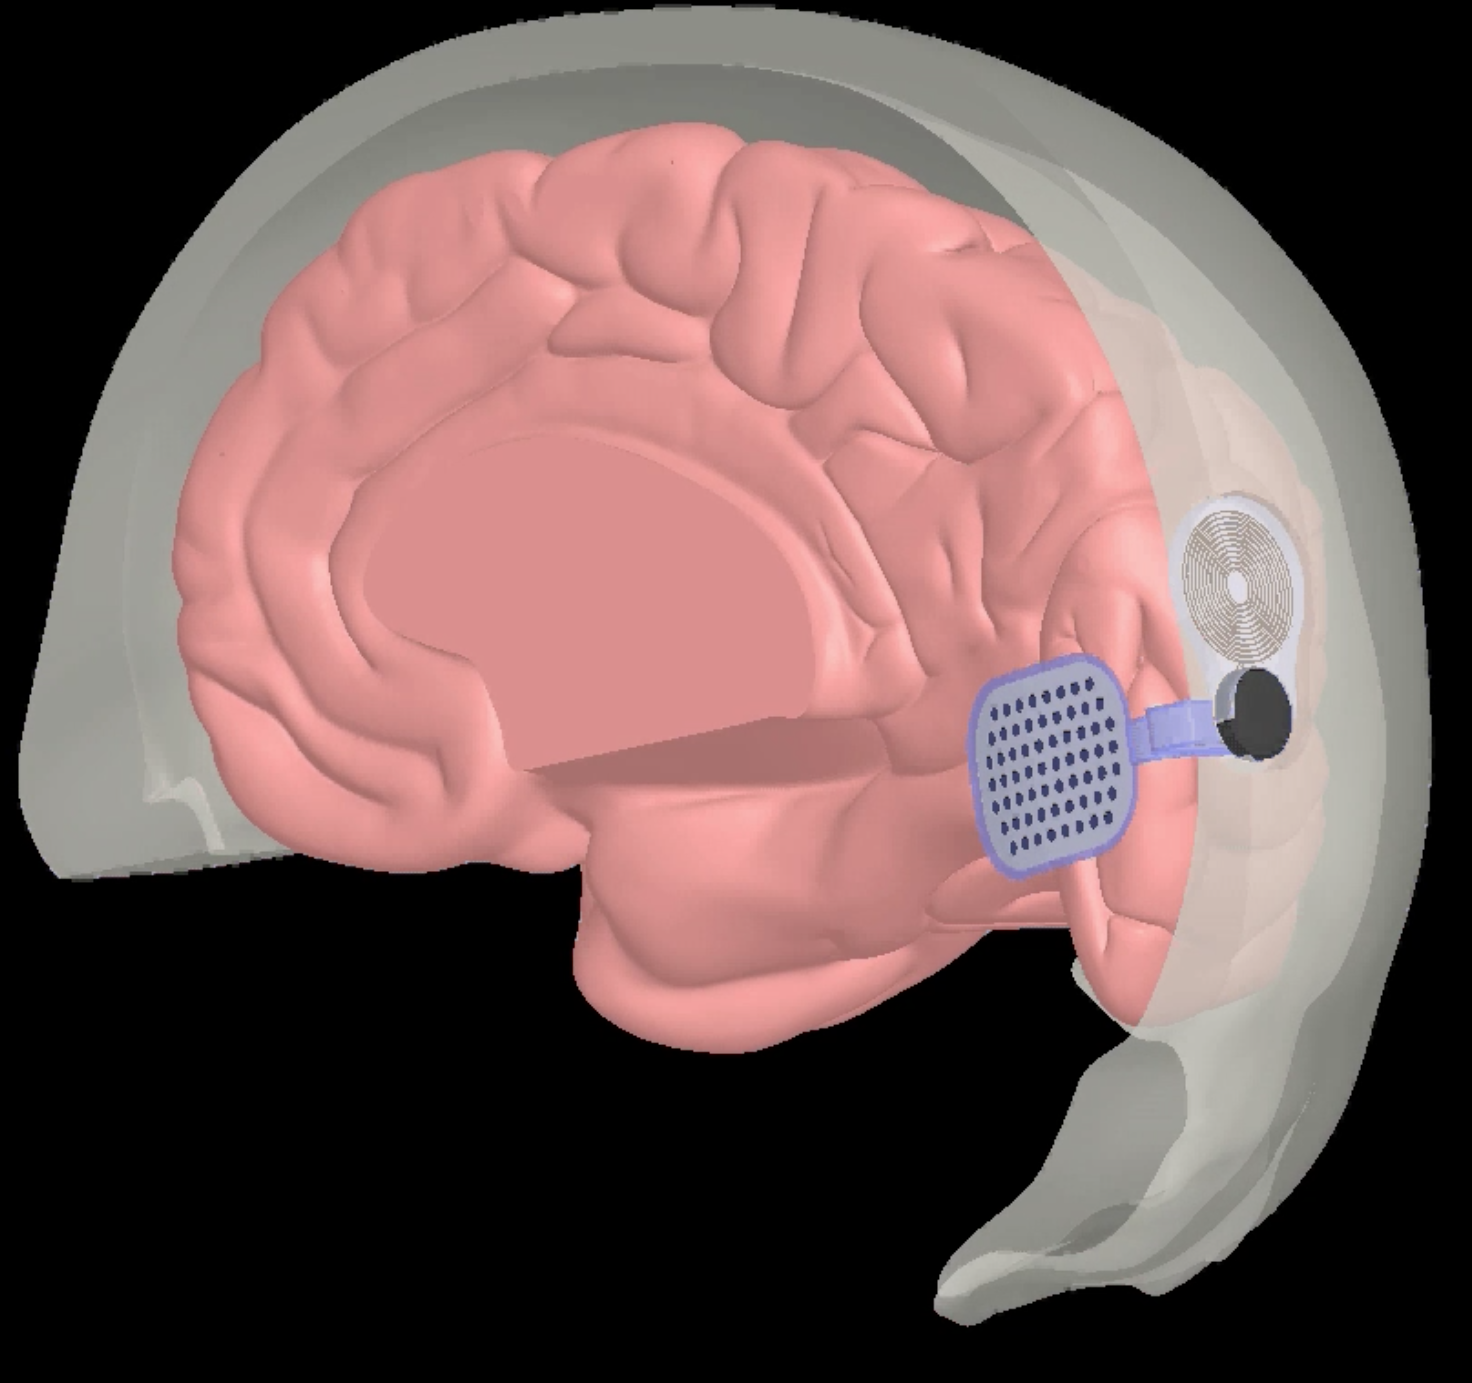 Animation of a bionic eye implant and the brain